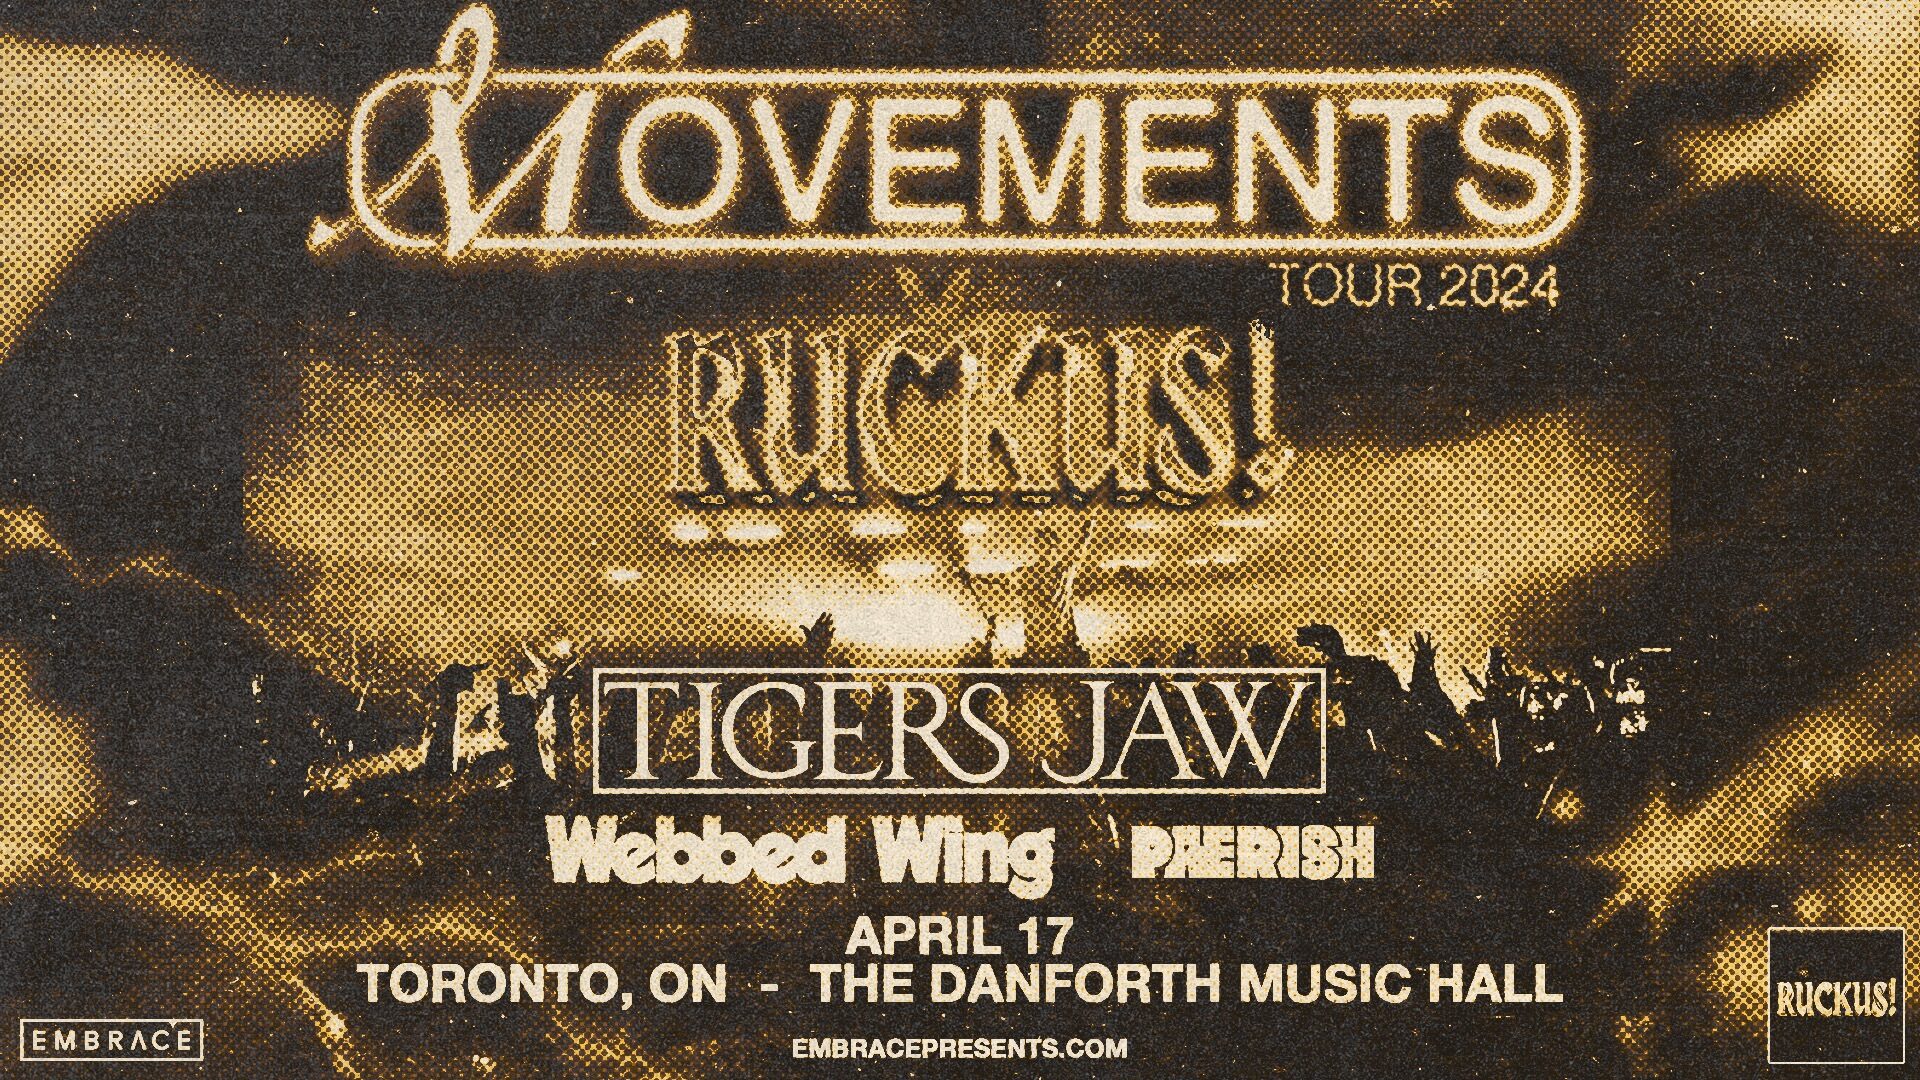 Movements RUCKUS! TOUR 2024, Embrace at The Danforth Music Hall